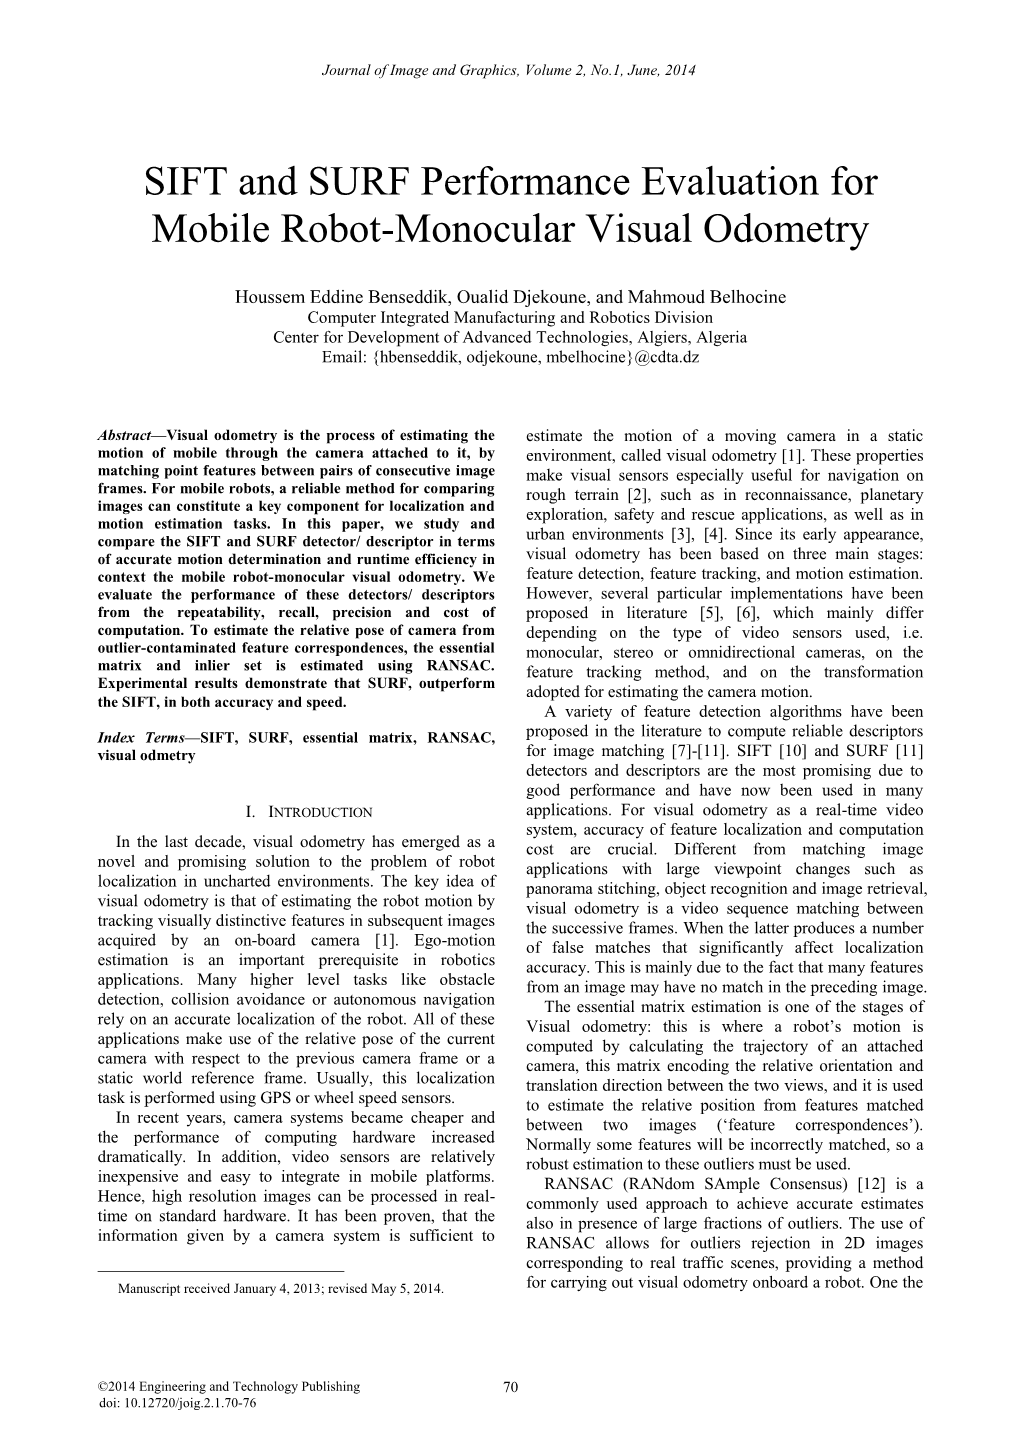 SIFT and SURF Performance Evaluation for Mobile Robot-Monocular Visual Odometry